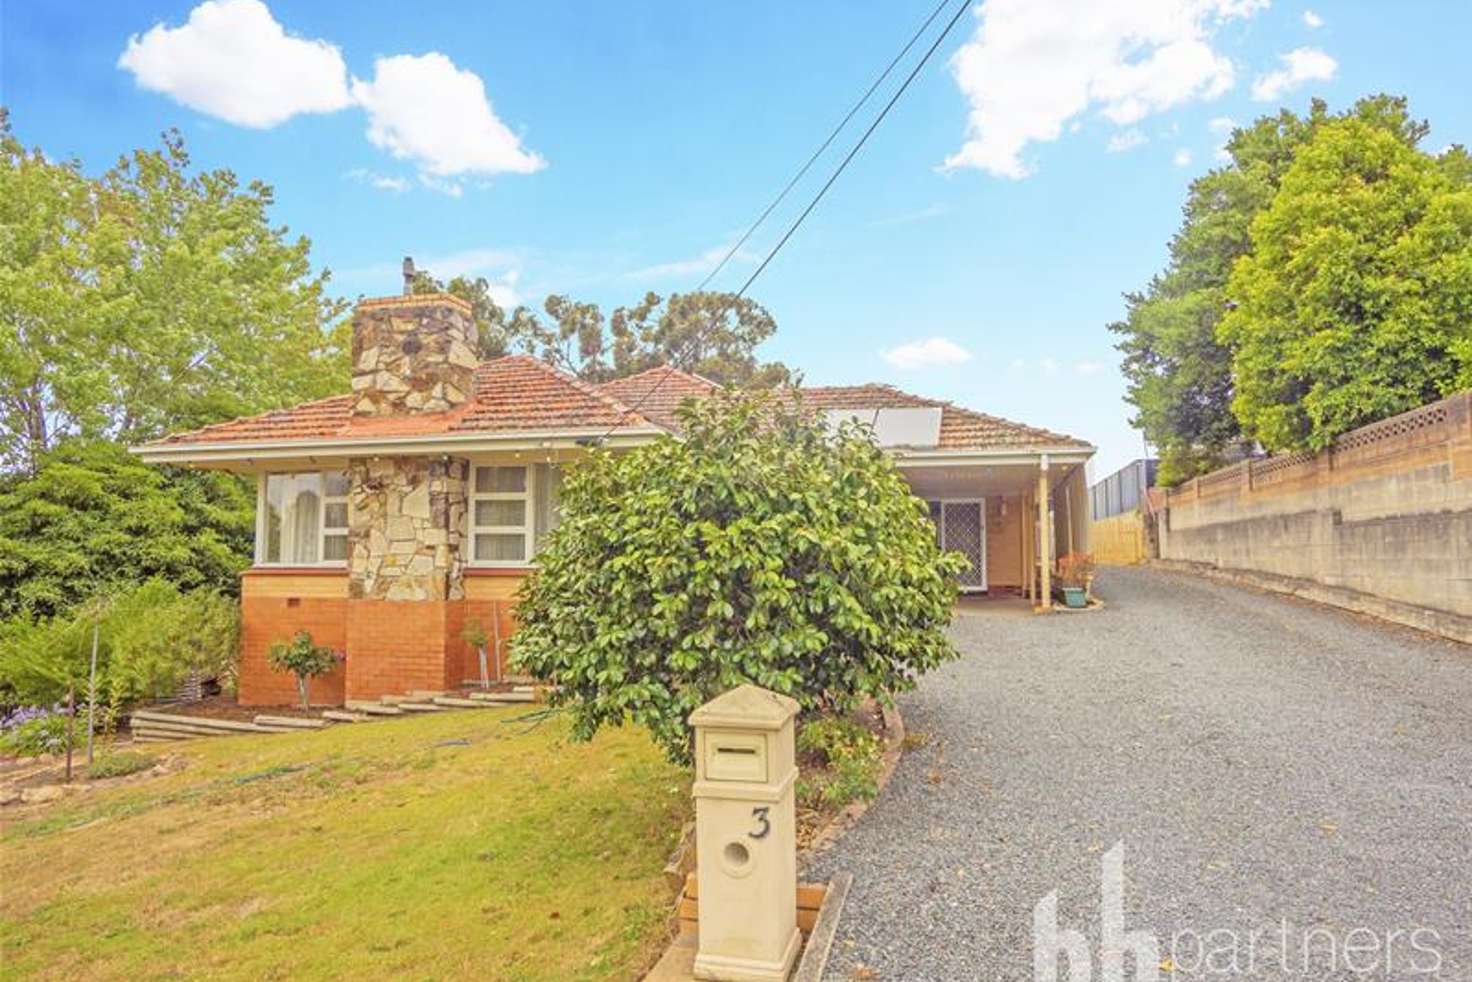 Main view of Homely house listing, 3 School Road, Lobethal SA 5241